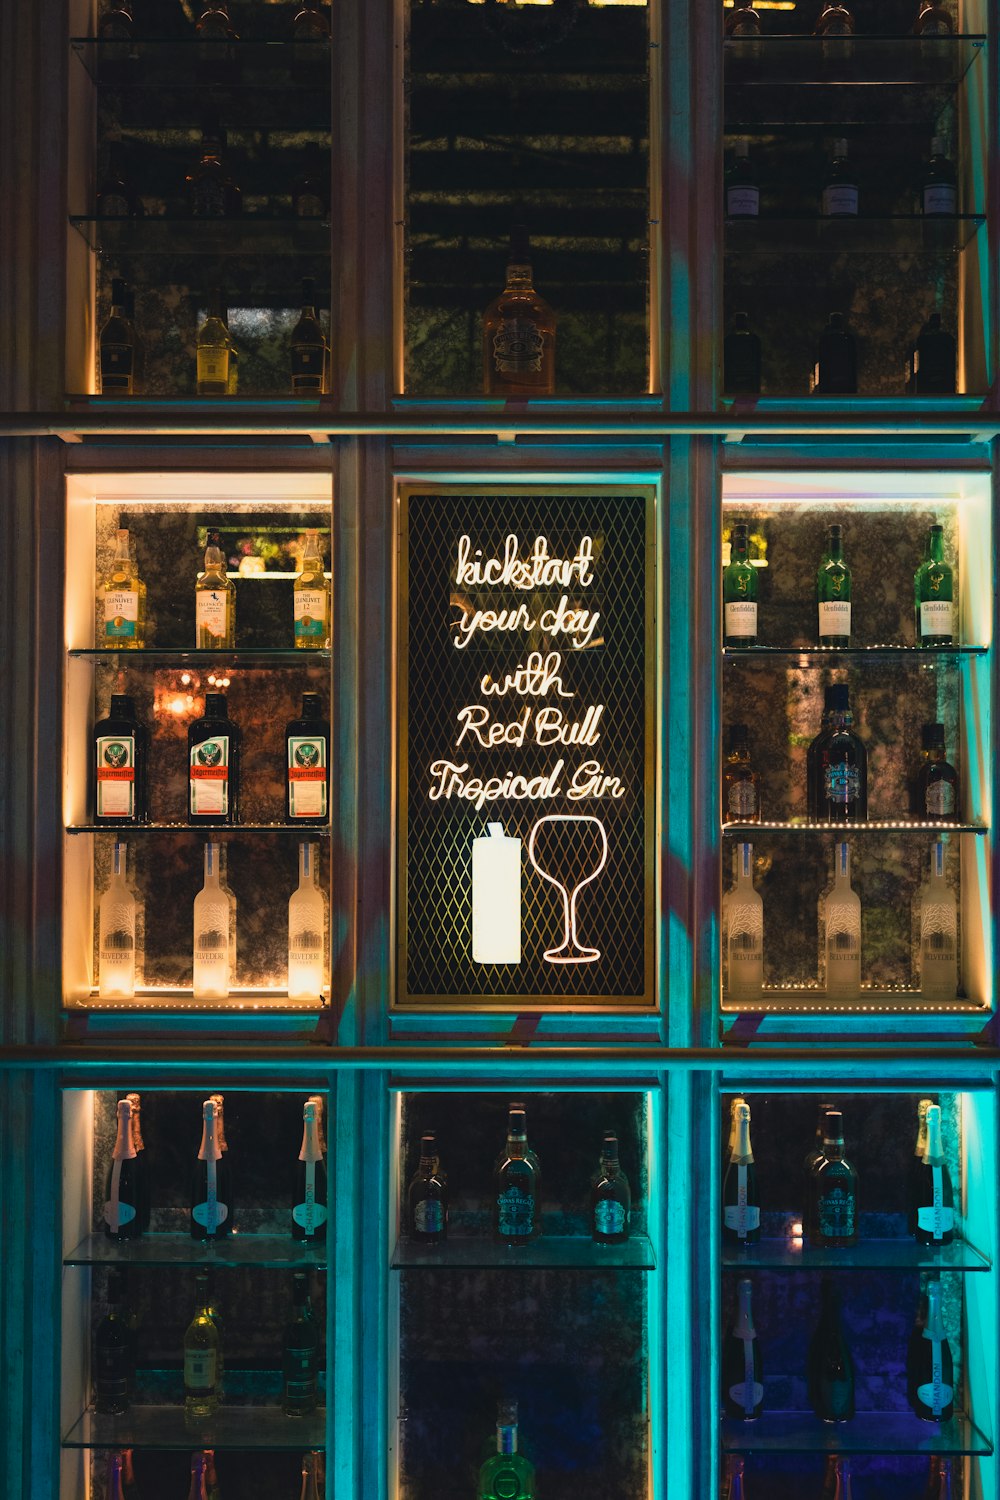 a display of liquor bottles in a window